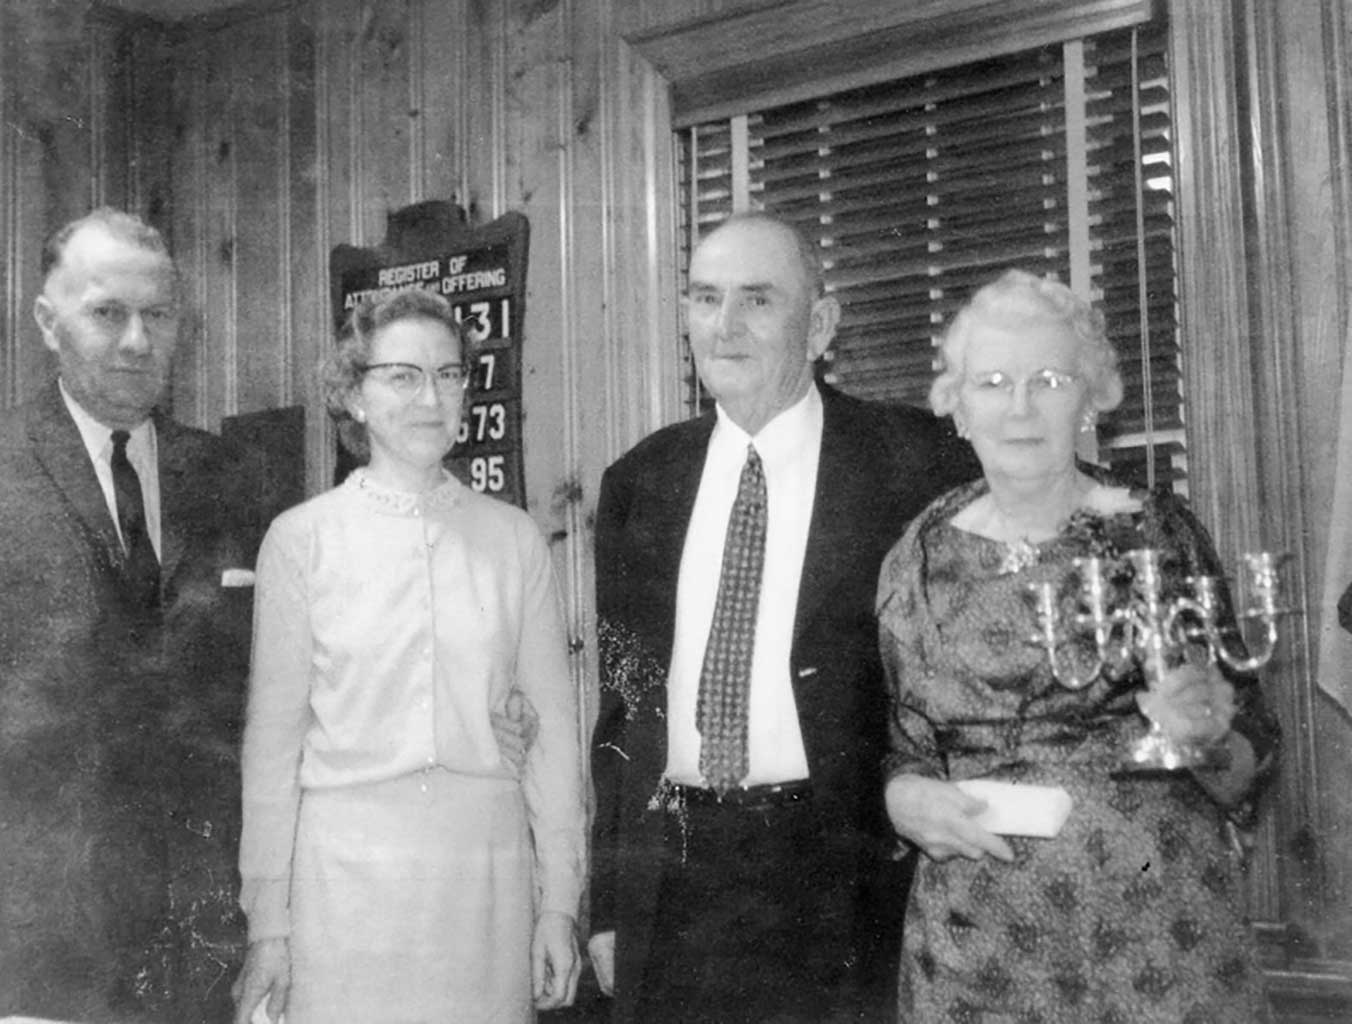 mrs-gilliam-being-honored-at-wesley-chapel-for-over-40-years-as-a-sunday-school-teacher-in-1962img357